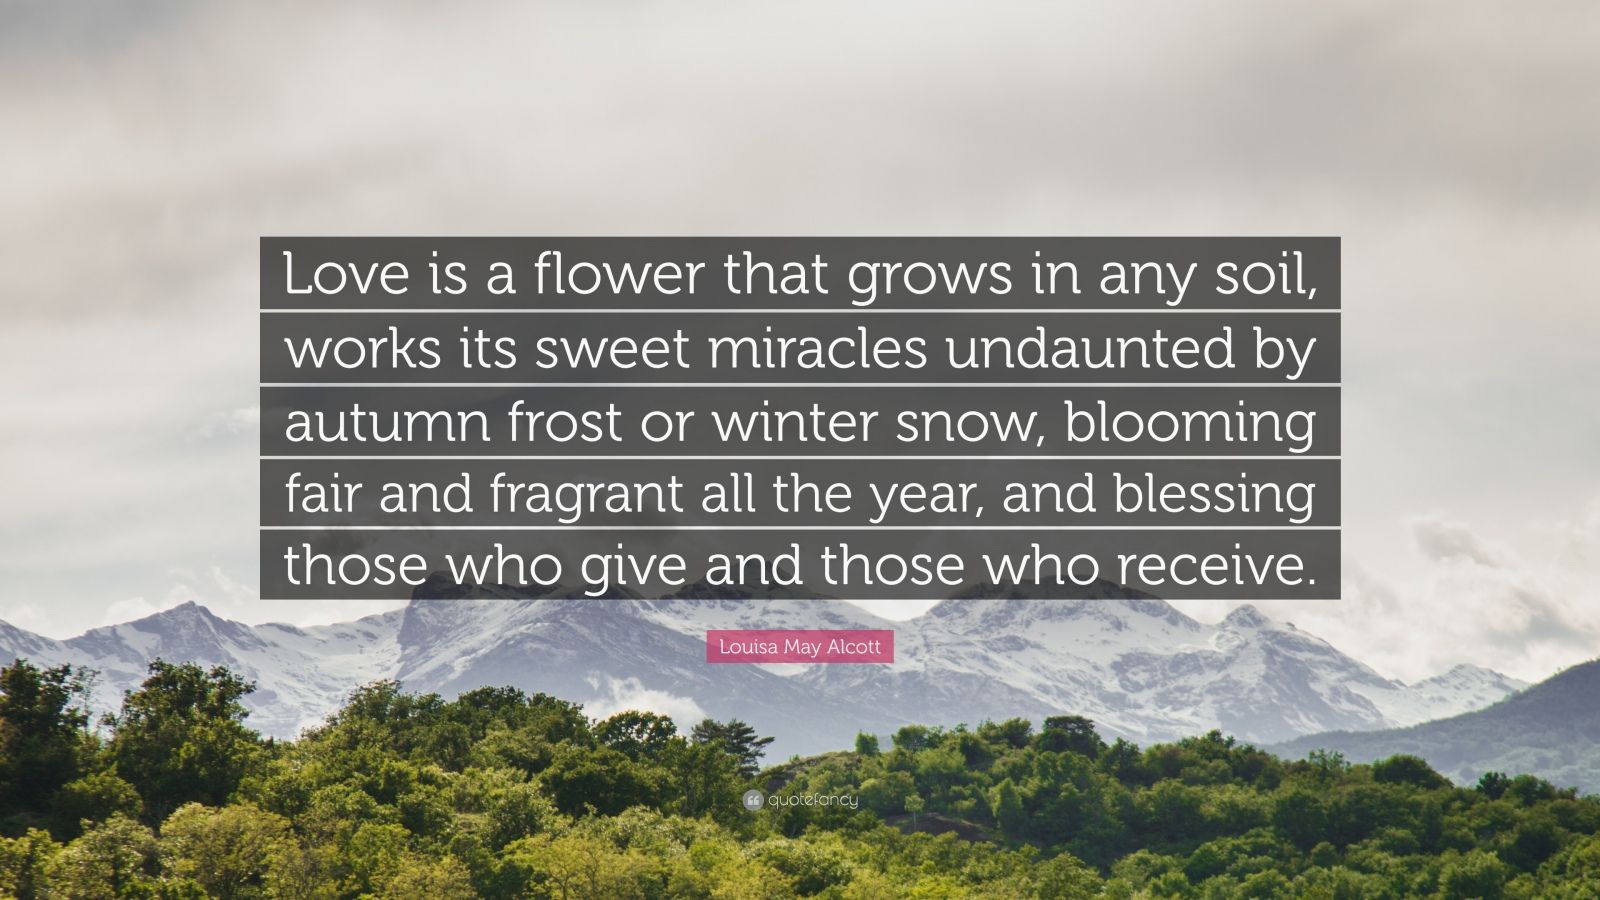 Louisa May Alcott Quote: “Love is a flower that grows in any soil